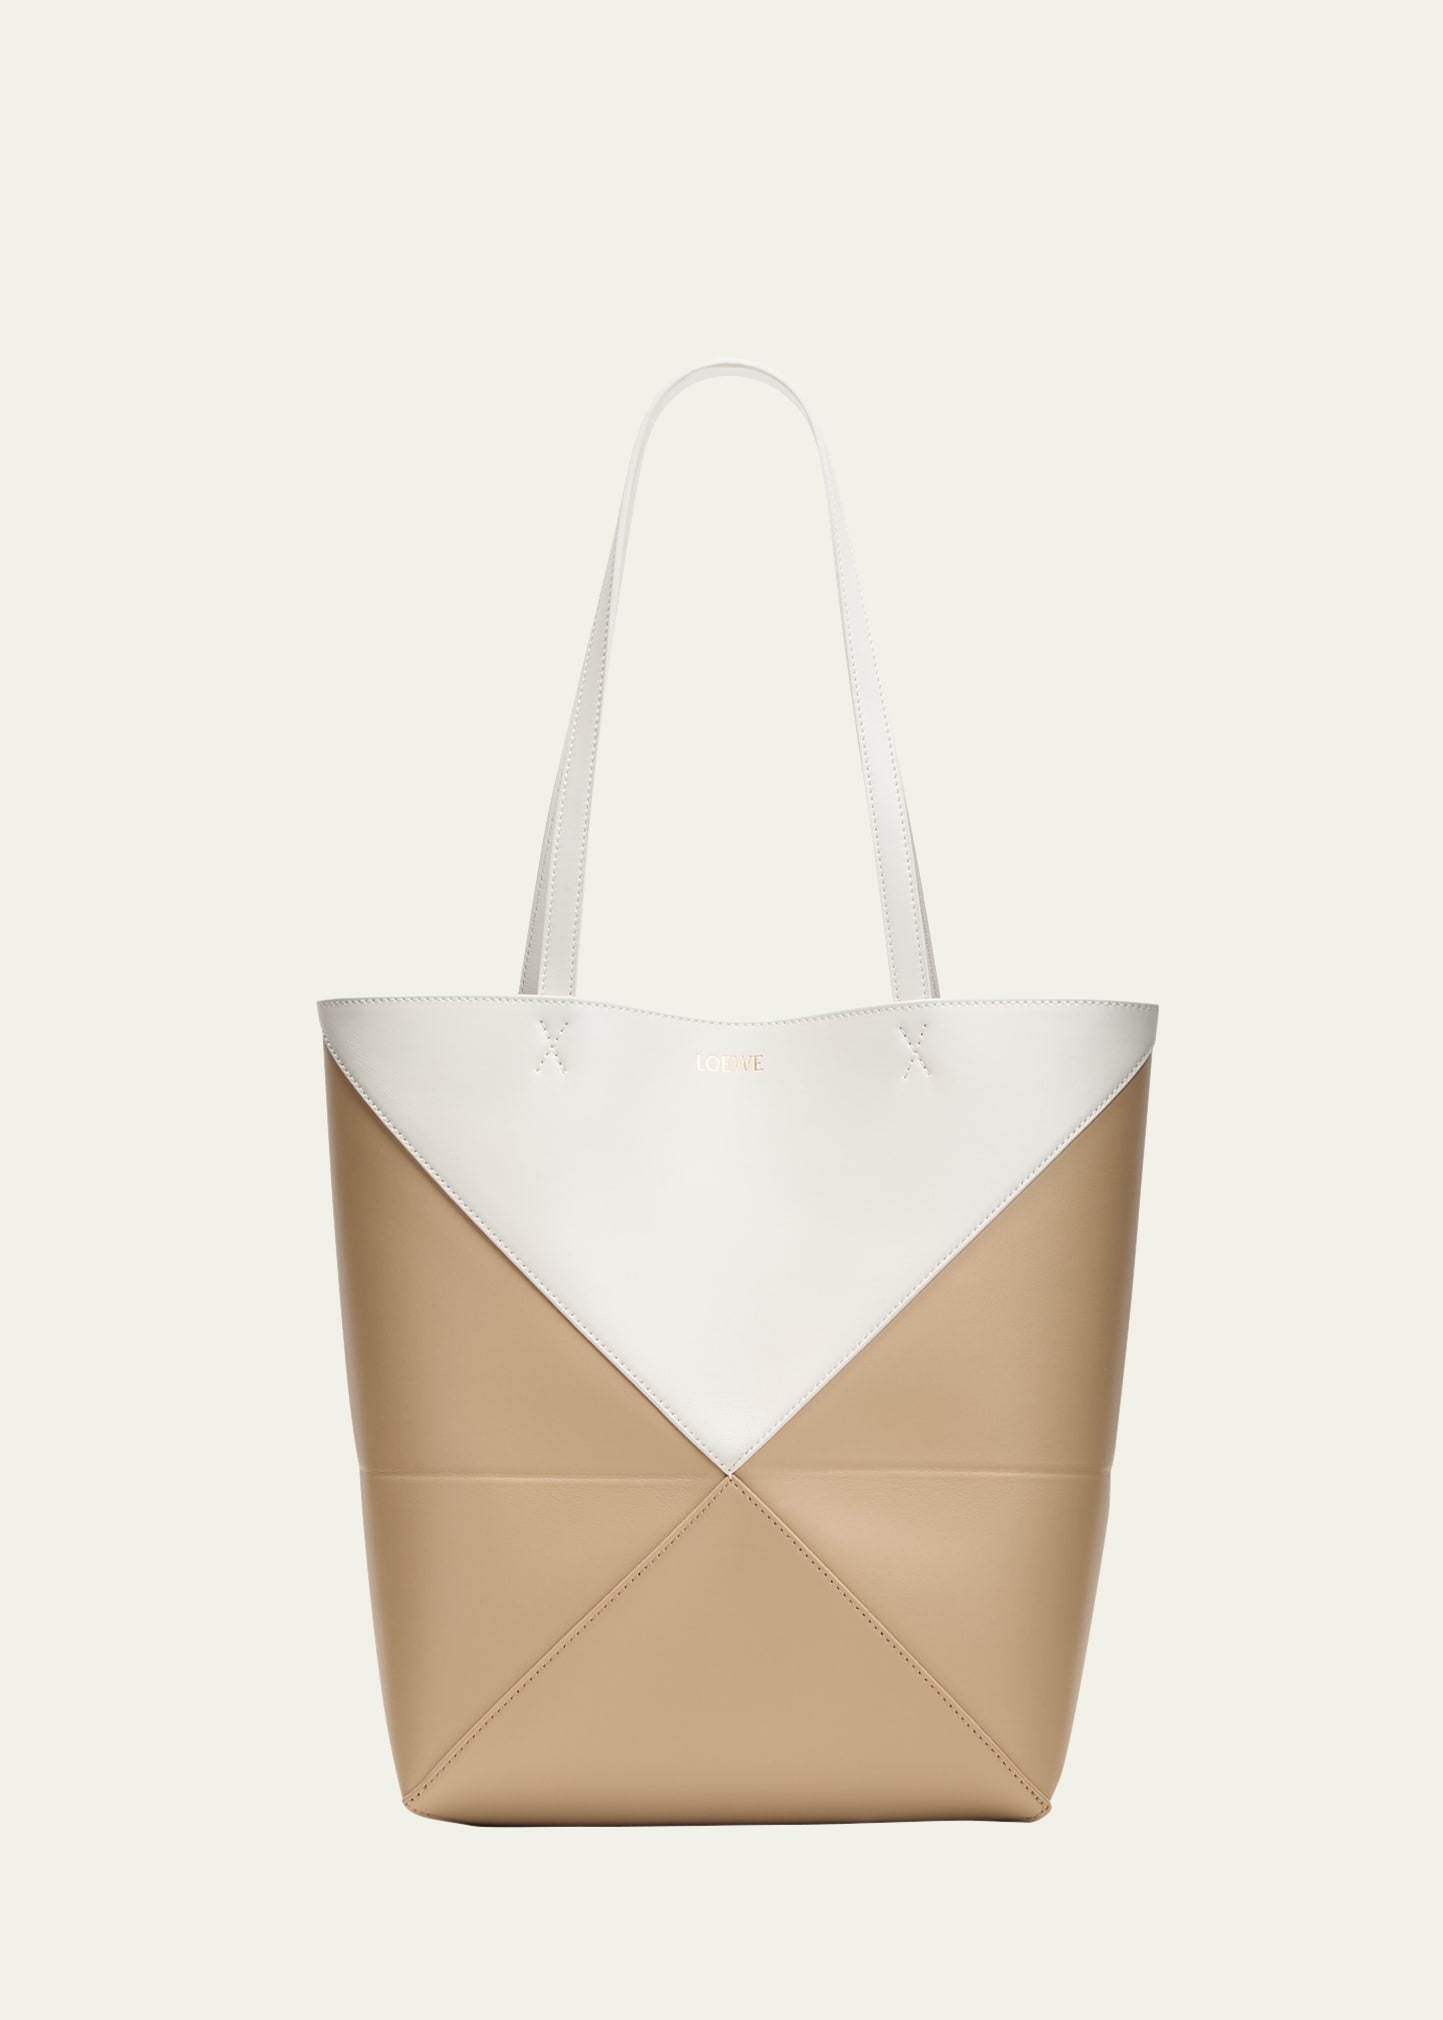 Puzzle Fold Medium Tote Bag in Shiny Bicolor Leather